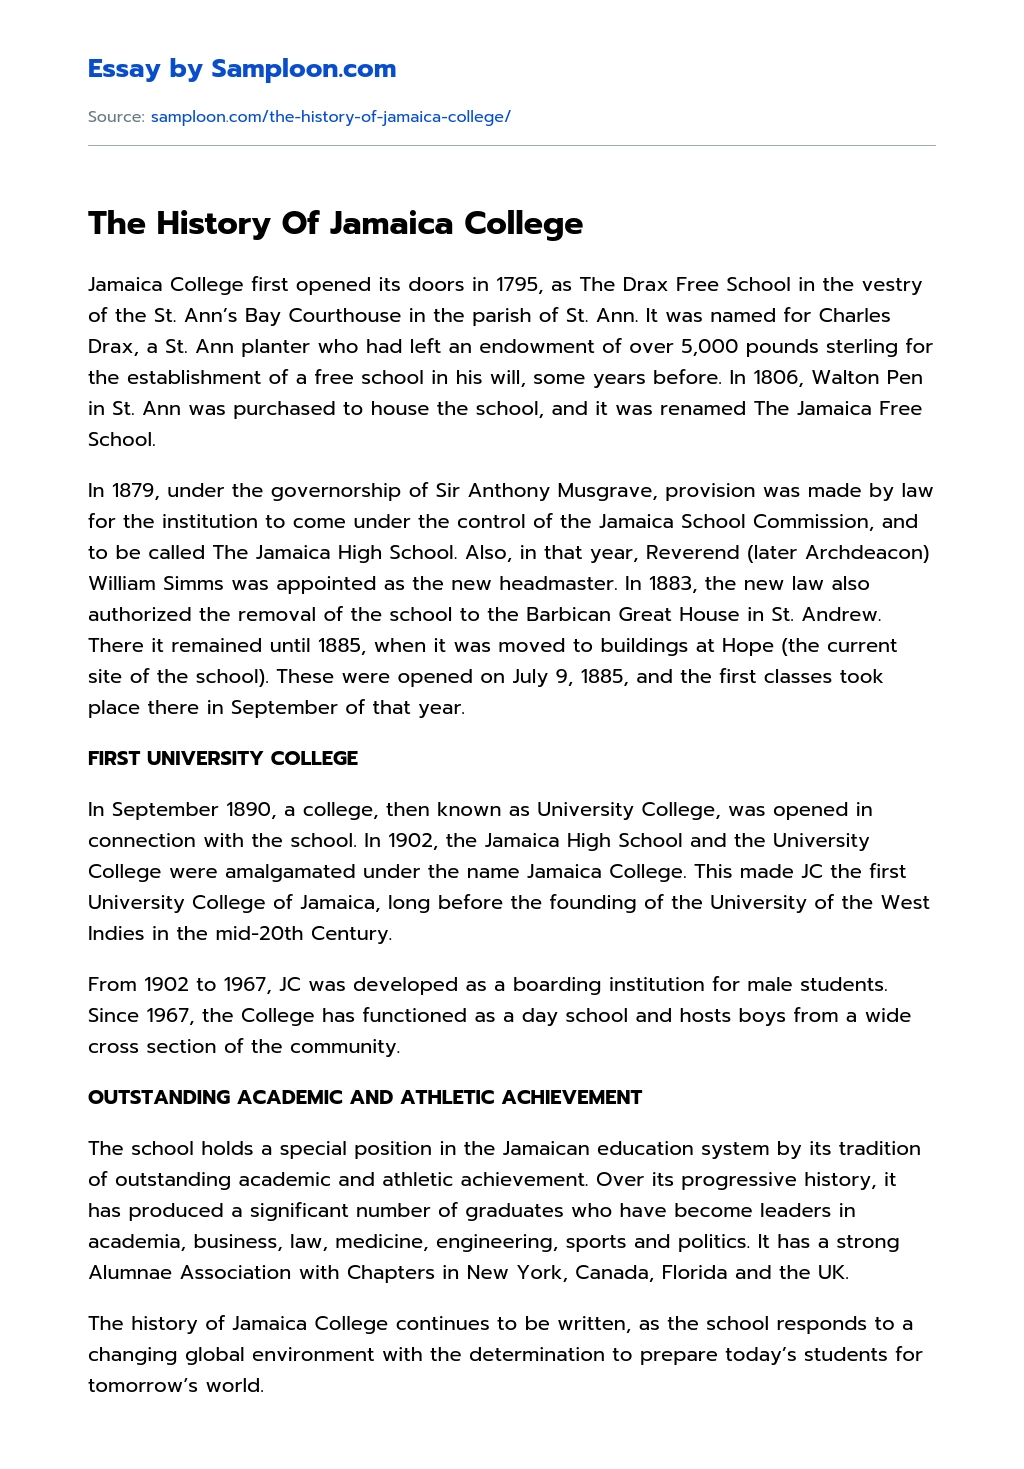 The History Of Jamaica College essay